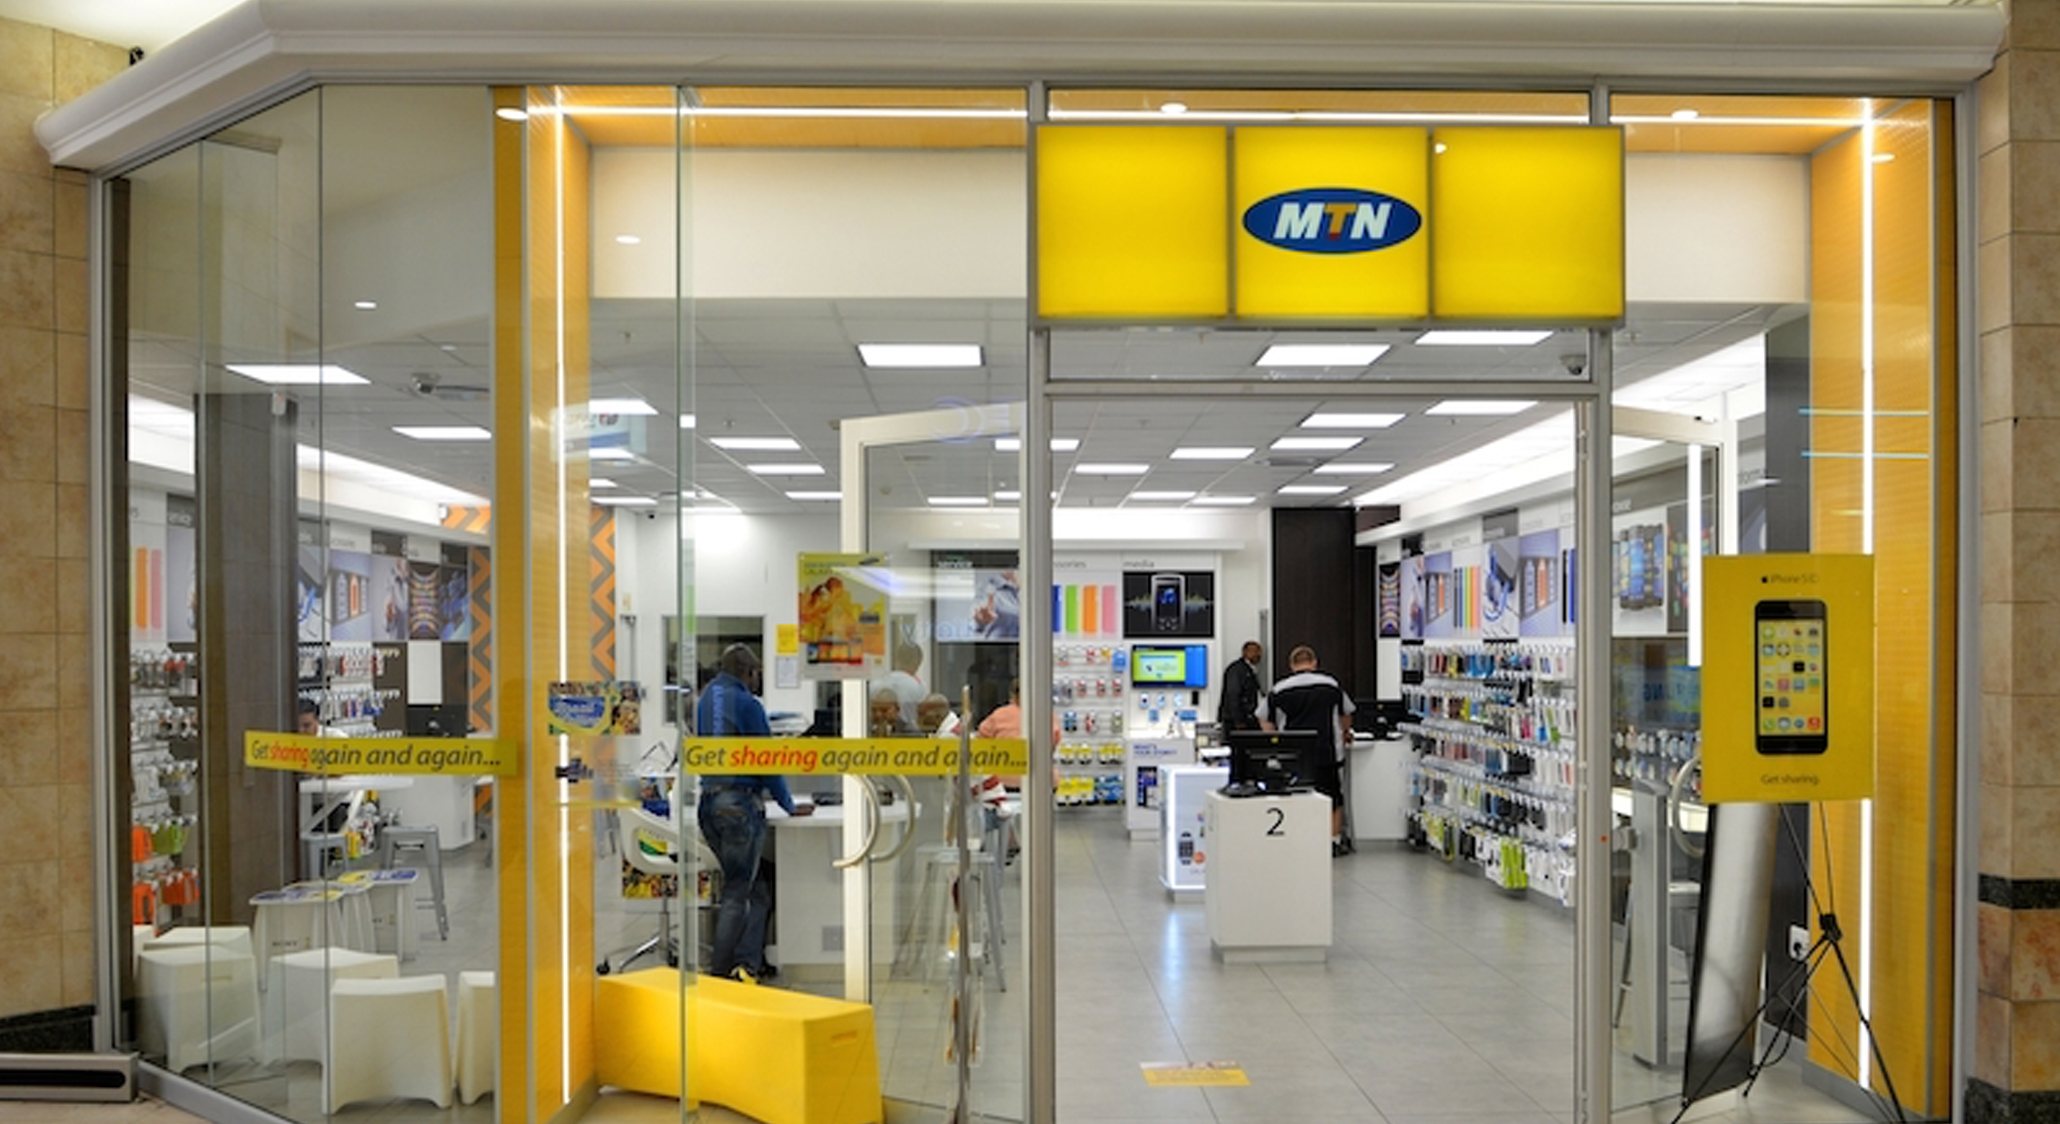 MTN To Slash Capital Expenditure, Records Rise In Data Revenue In First Quarter